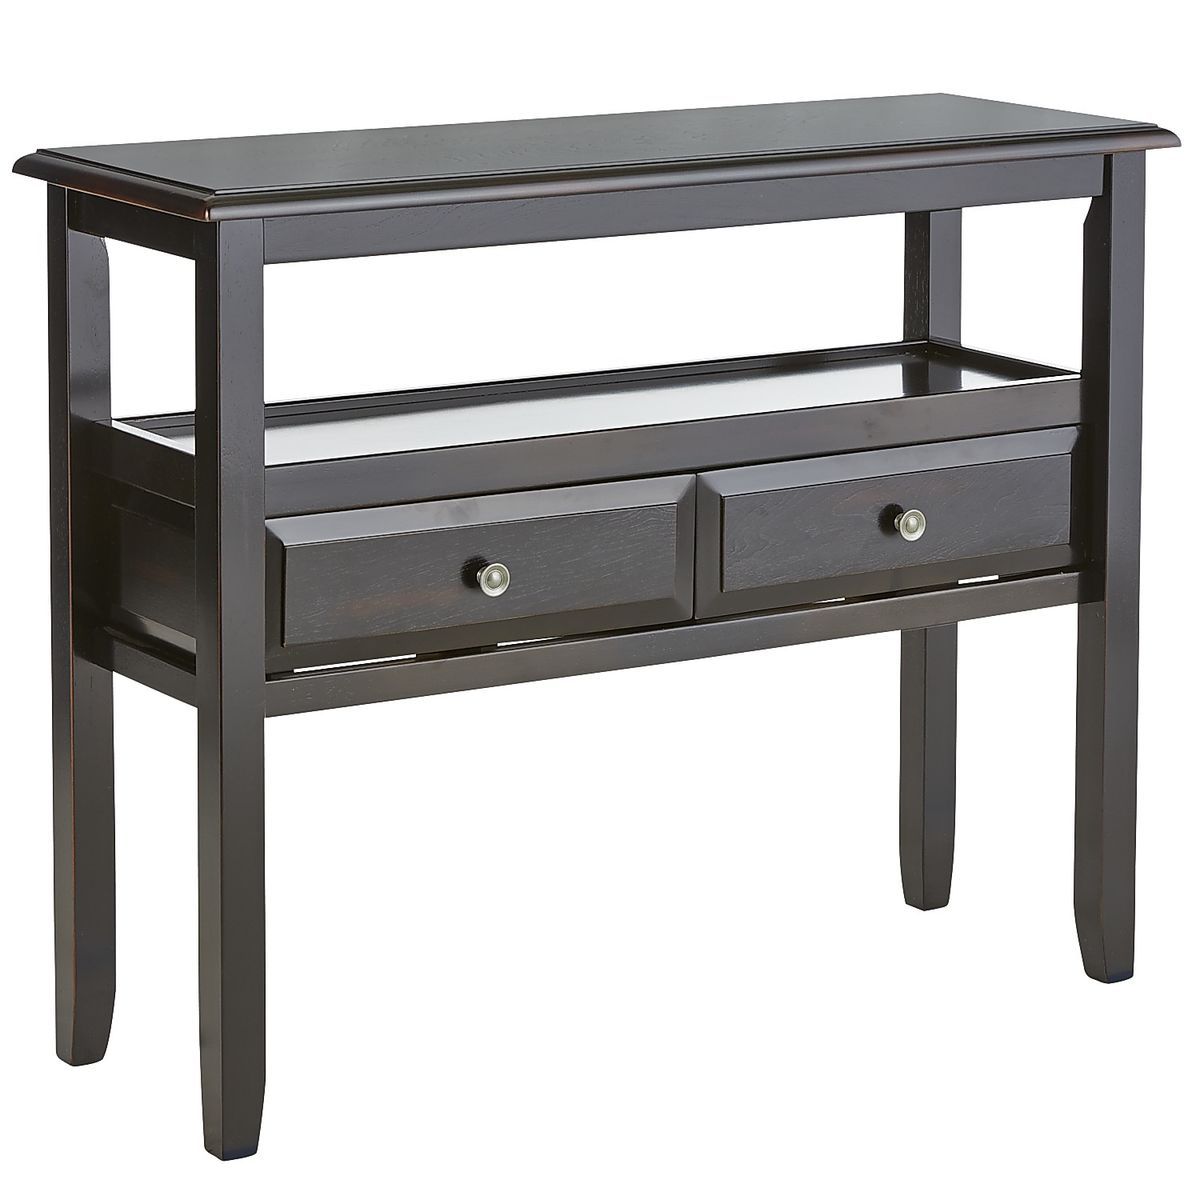 Black Console Table Small 3034286_1 | Costa Rican Furniture Throughout Antique White Black Console Tables (Gallery 19 of 20)